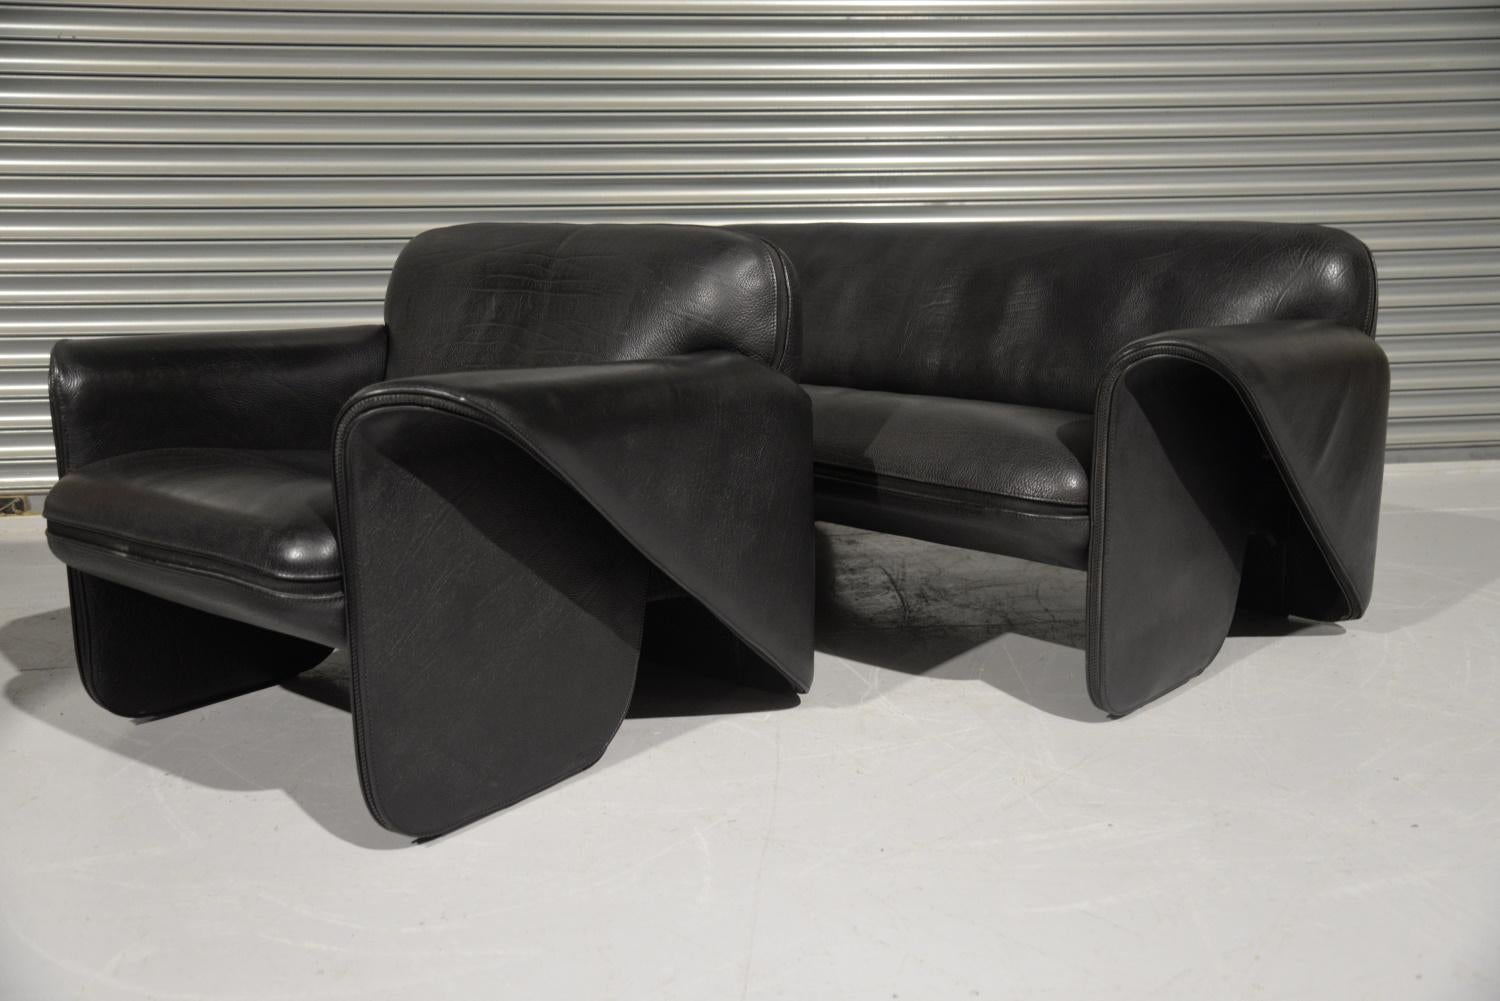 We are delighted to bring to you an ultra rare vintage De Sede DS 125 sofa and armchair designed by Gerd Lange in 1978. These sculptural pieces are upholstered in 3mm-5mm stunning thick black leather with a decorative zipper seam. Rarely available